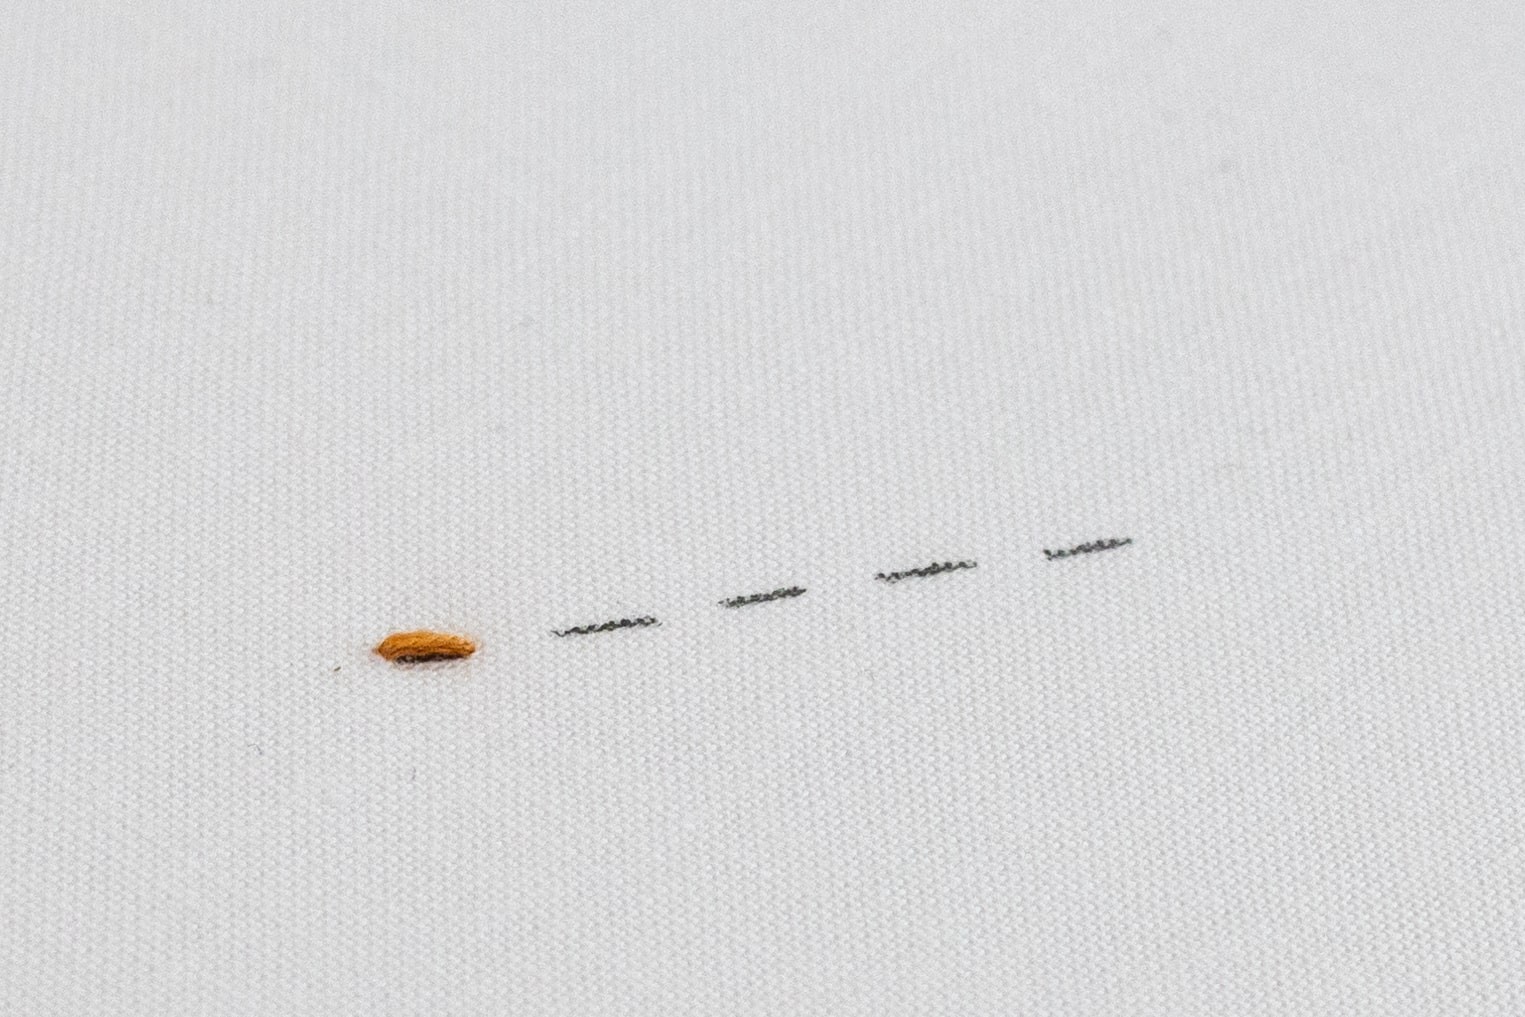 A stitch has been created on the marked fabric.